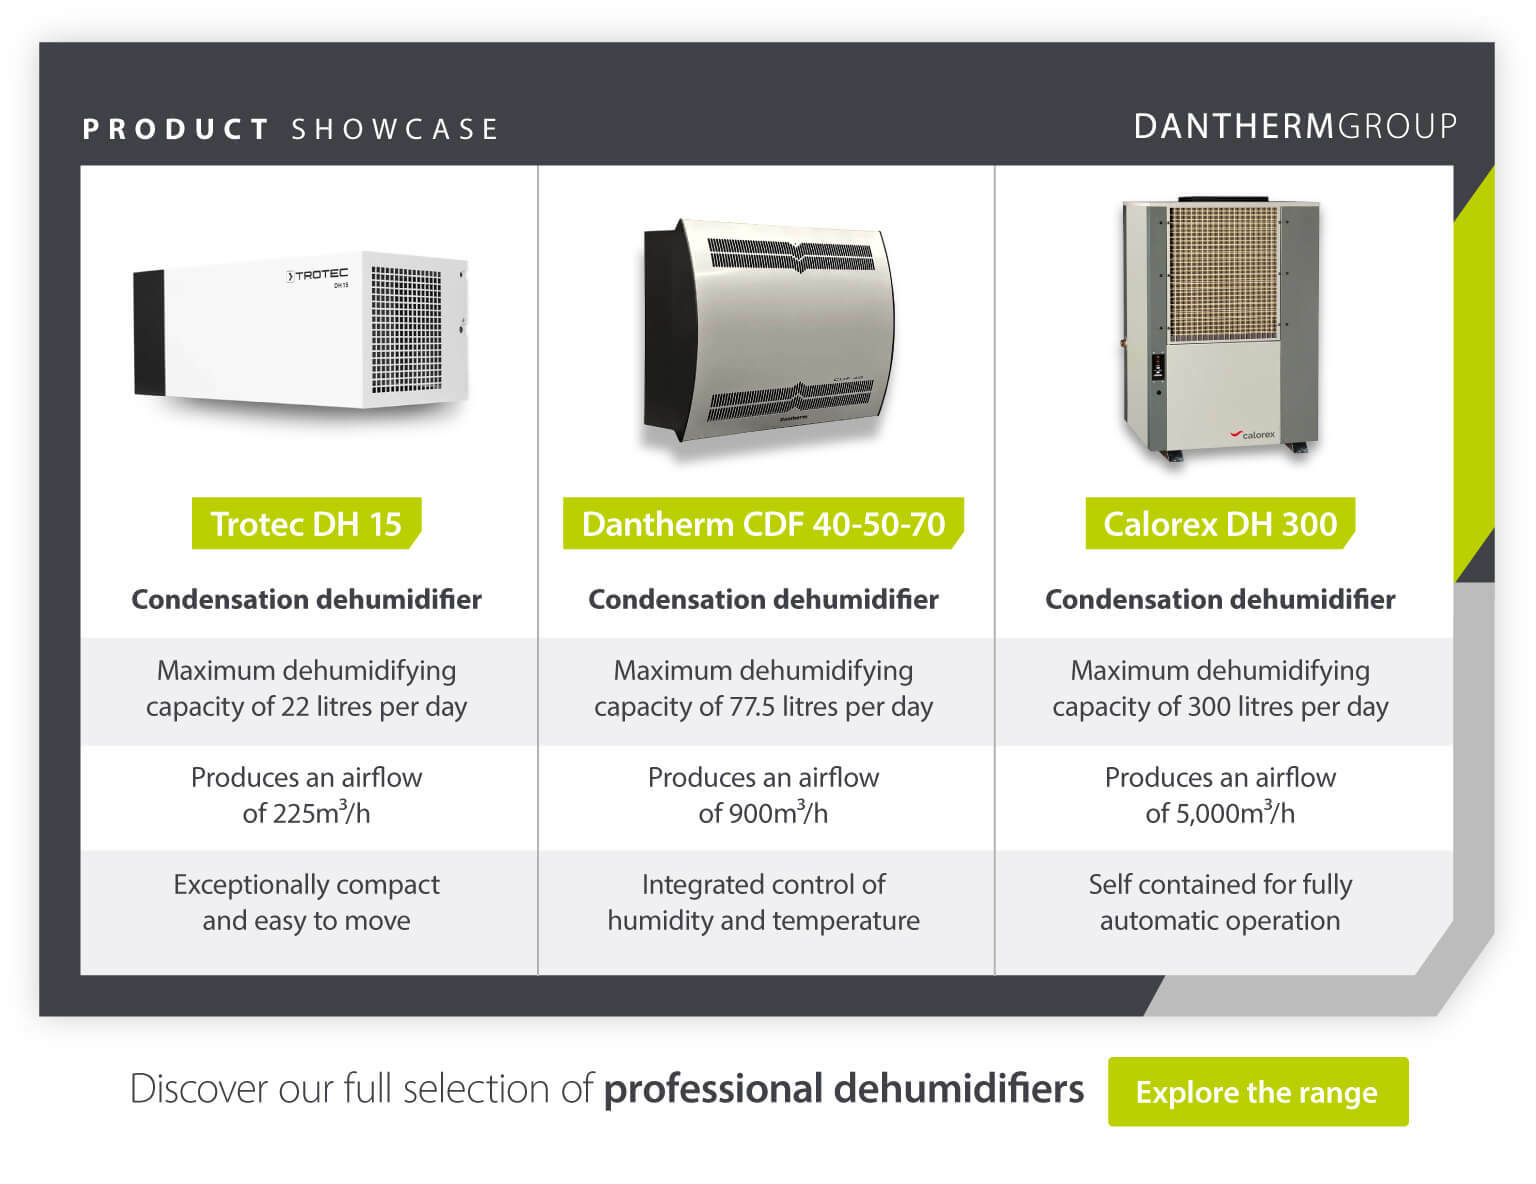 Product showcase comparing condensation dehumidifiers for classic car storage